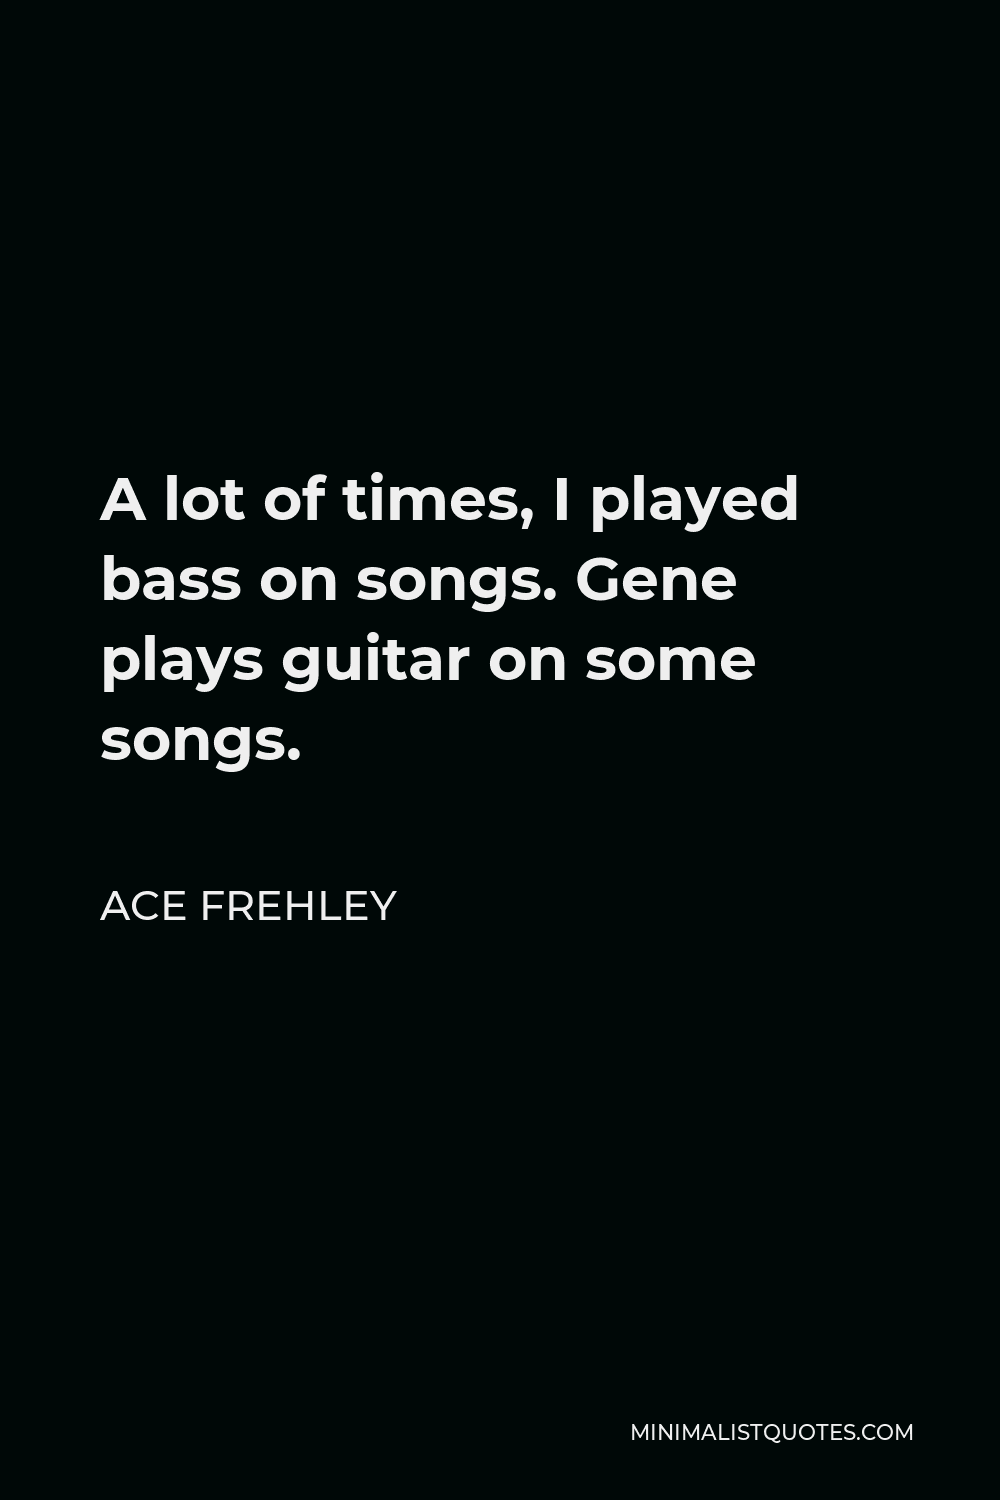 Ace Frehley Quote - A lot of times, I played bass on songs. Gene plays guitar on some songs.